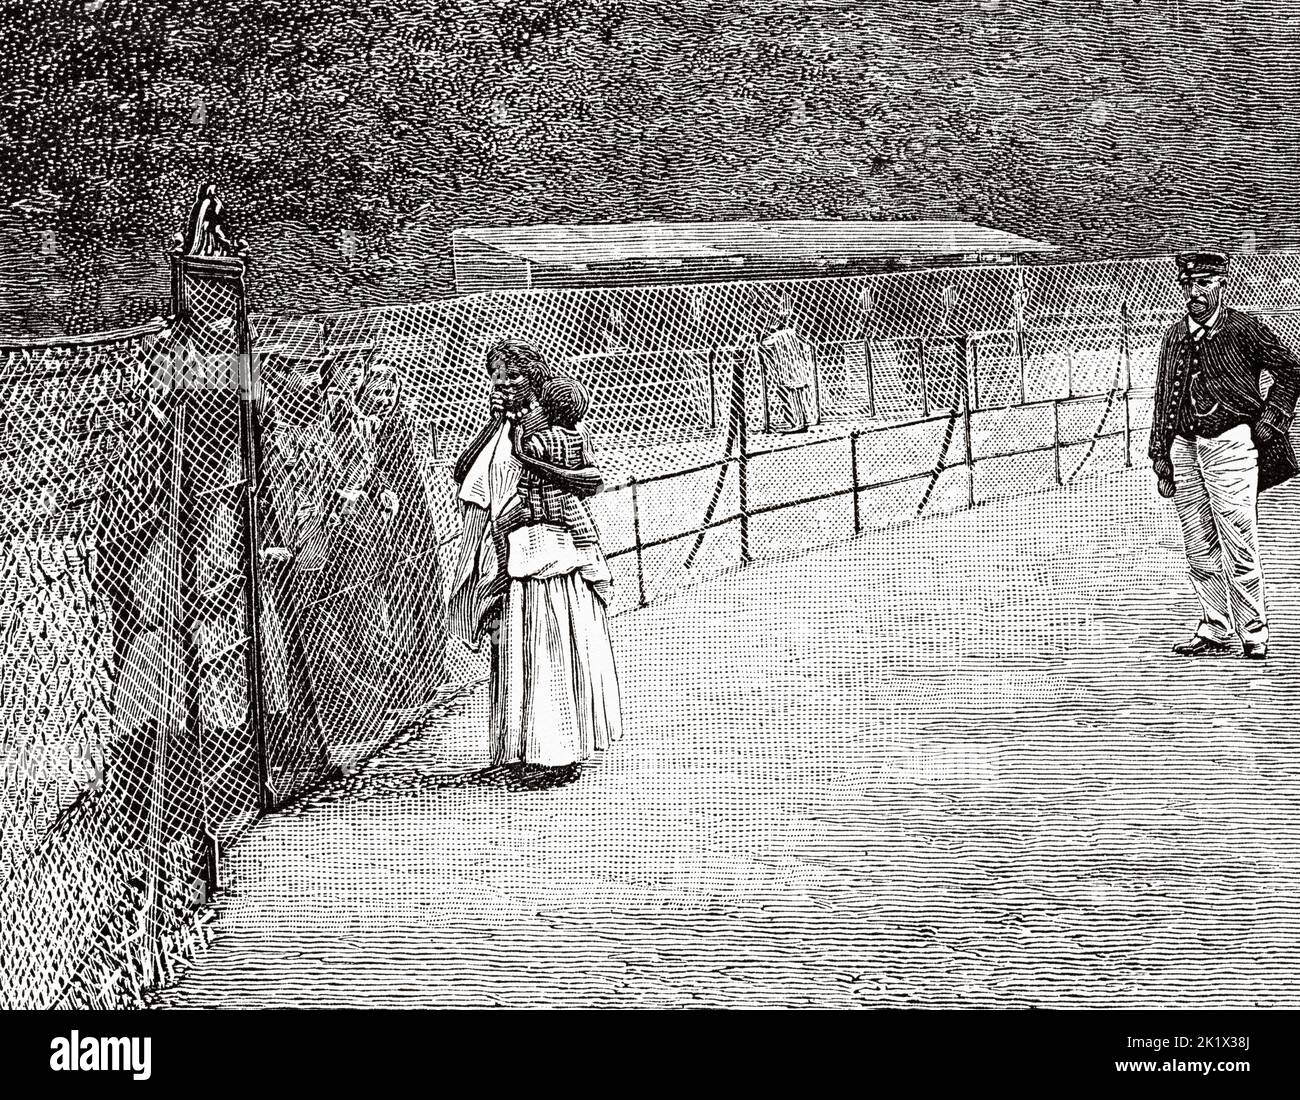 Somali woman exposed in the Jardin d'Acclimatation in Paris, France. Old 19th century engraved illustration from La Nature 1890 Stock Photo